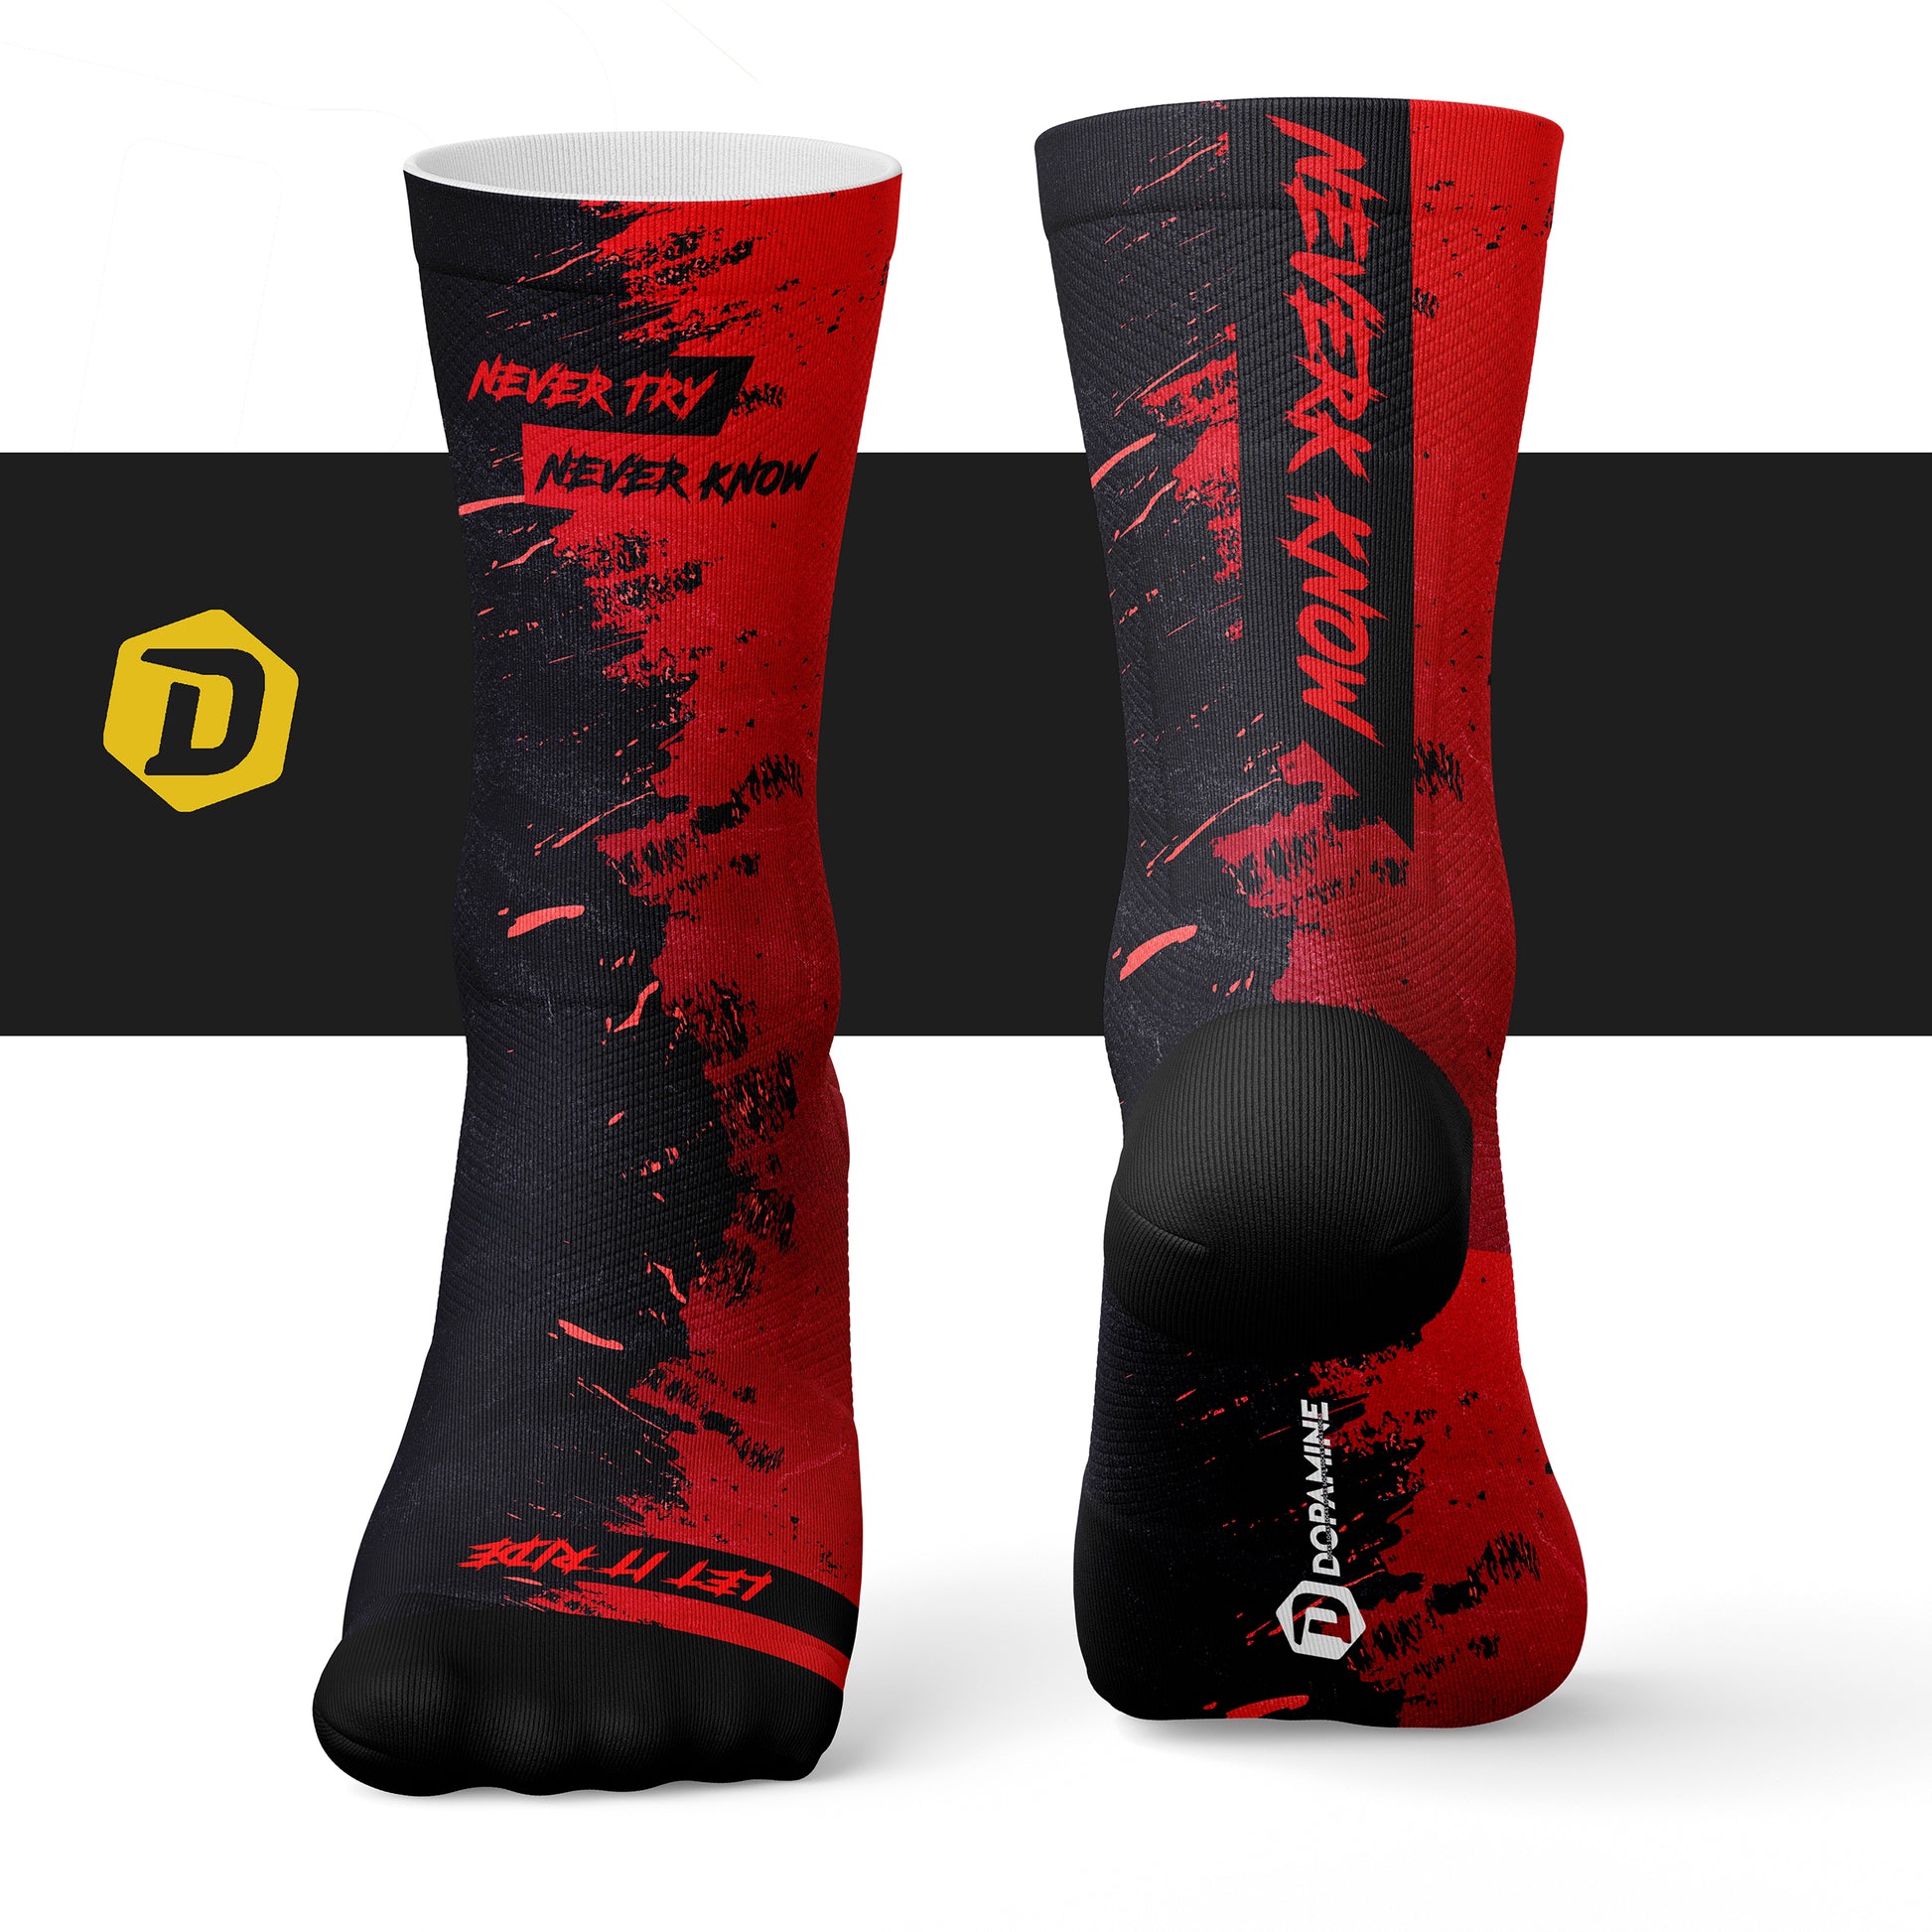 Calcetín Deportivo SOCK NEVER TRY NEVER KNOW - DOPAMINEOFICIAL